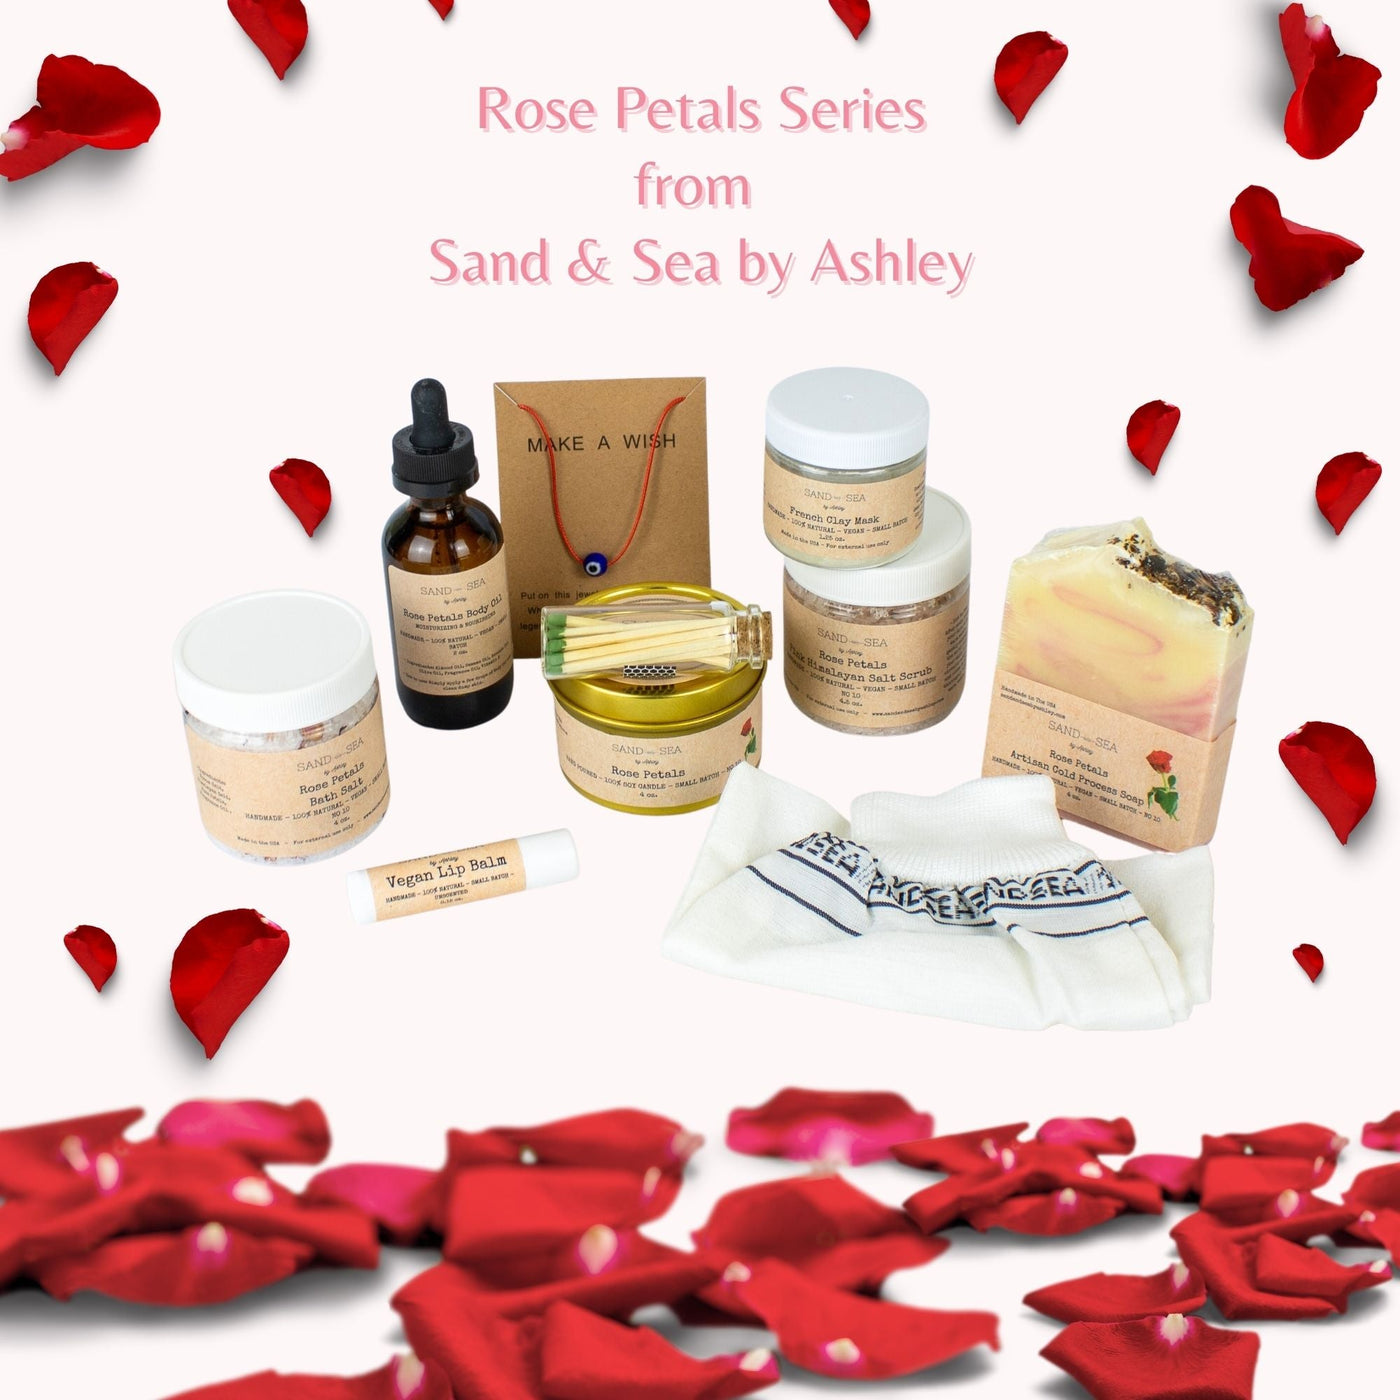 Birthday Spa Gifts for Her - Rose Petals Spa Gift Baskets for Mom, Sister, Friend - 10 Pieces - Sand & Sea by Ashley